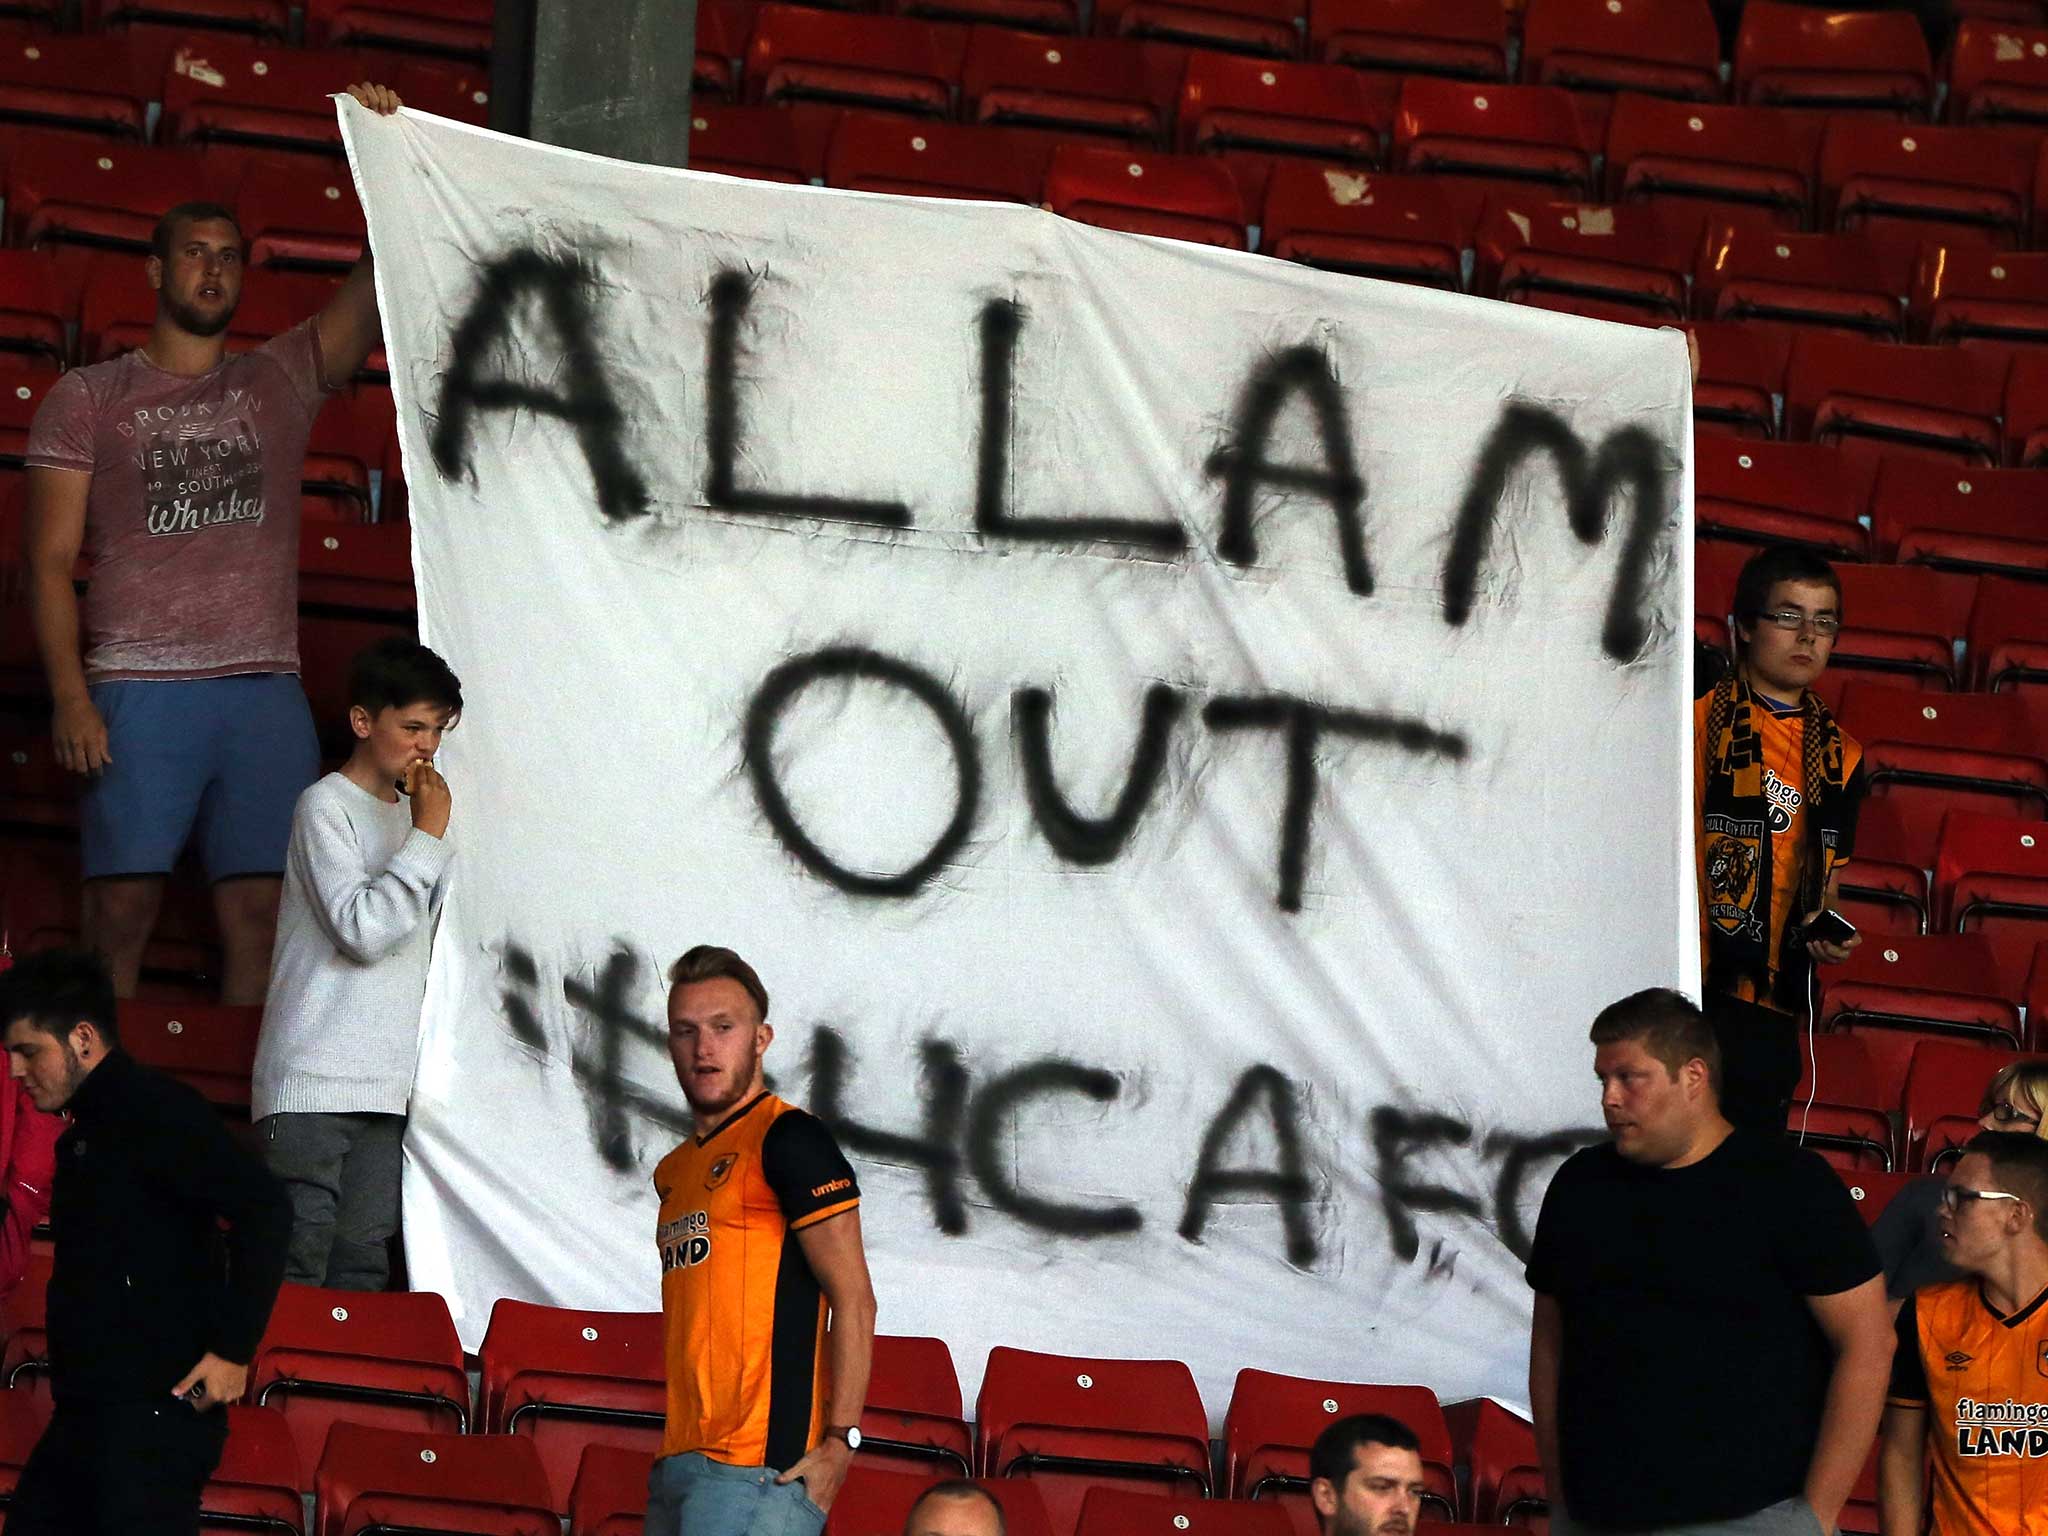 Hull City supporters make their views known during the pre-season friendly at Nottingham Forest